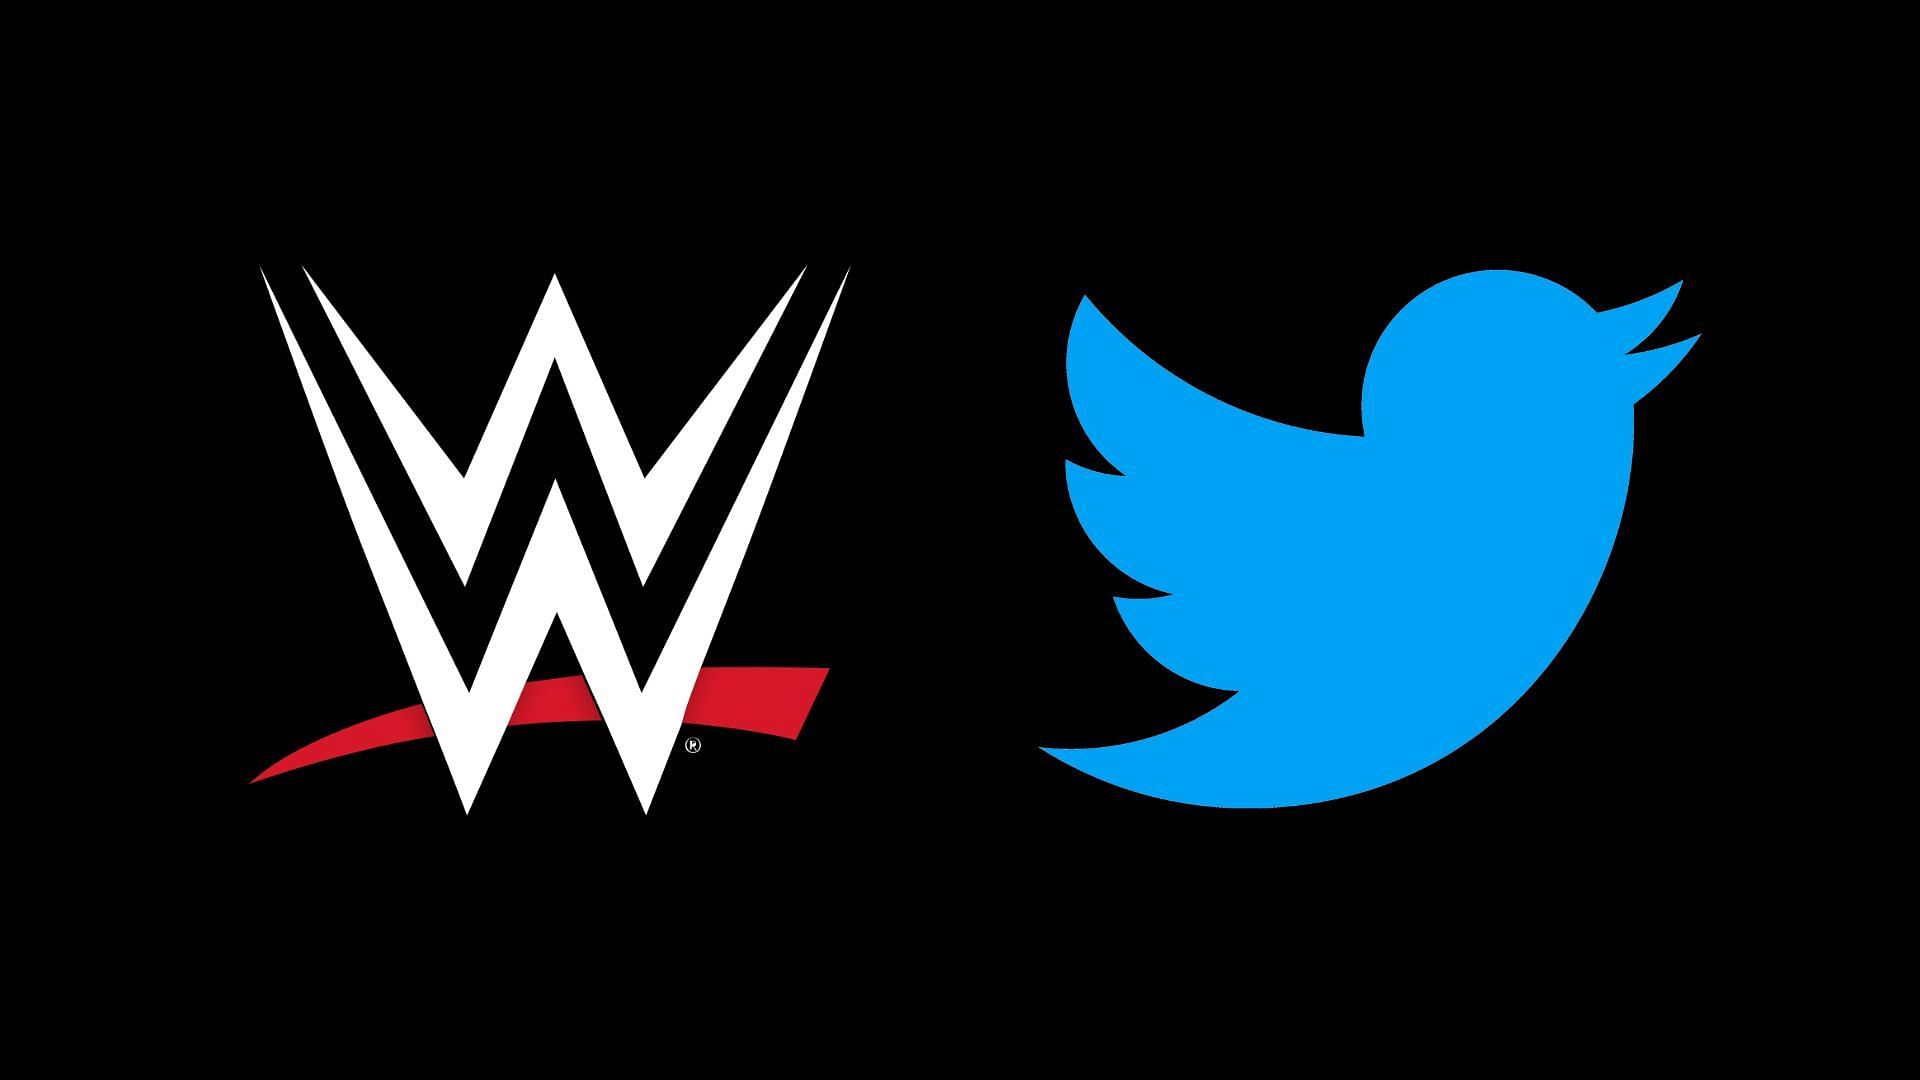 WWE Superstars have been vocal about Twitter lately